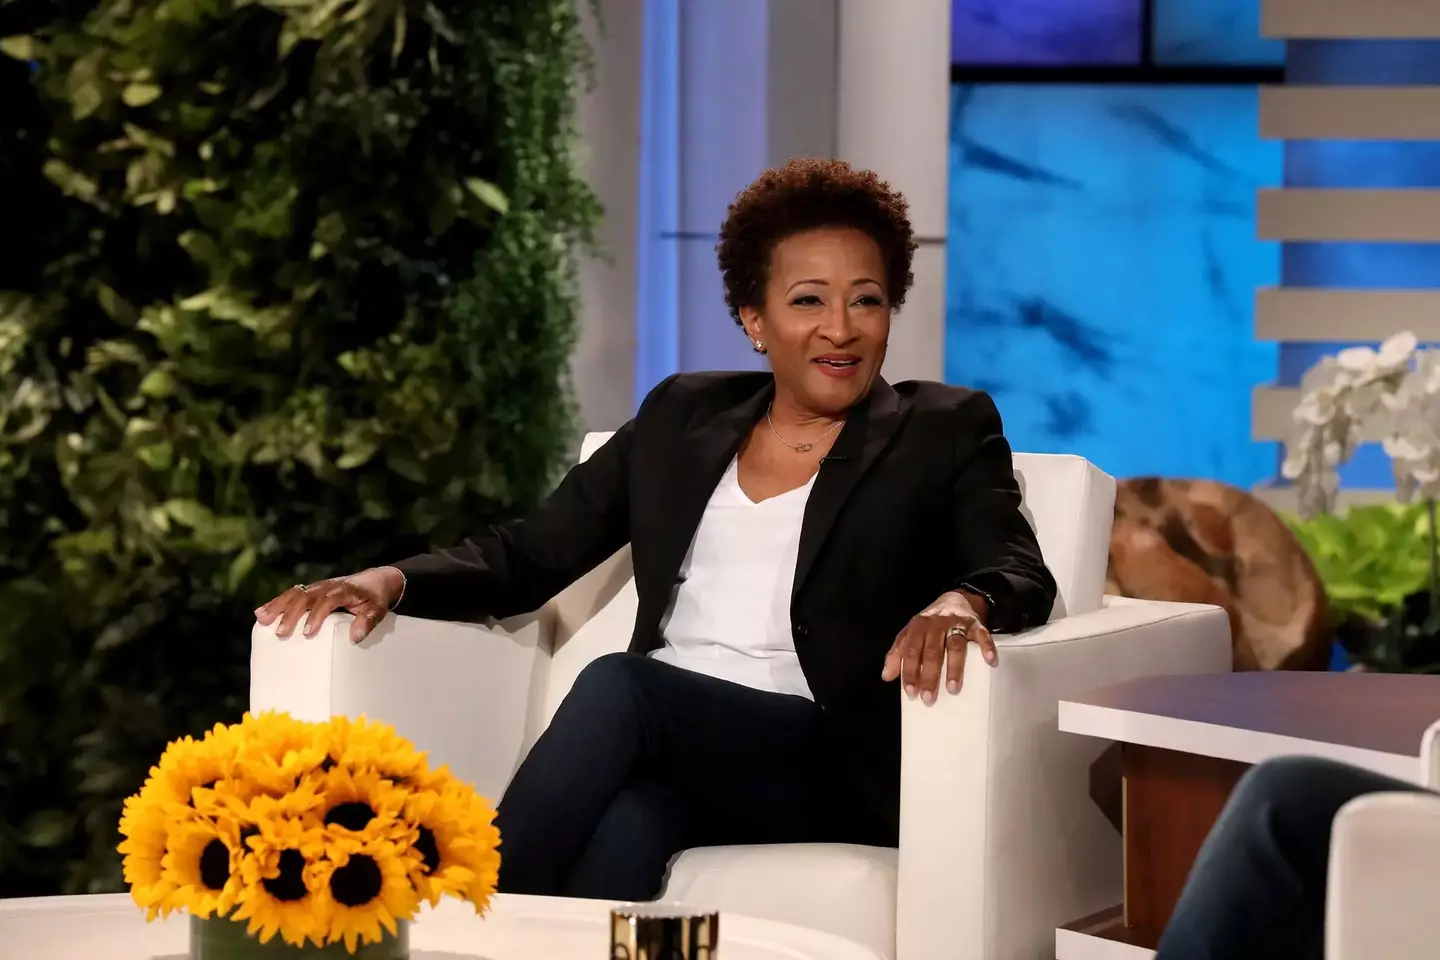 Wanda Sykes was also shocked by Will Smith's reaction.